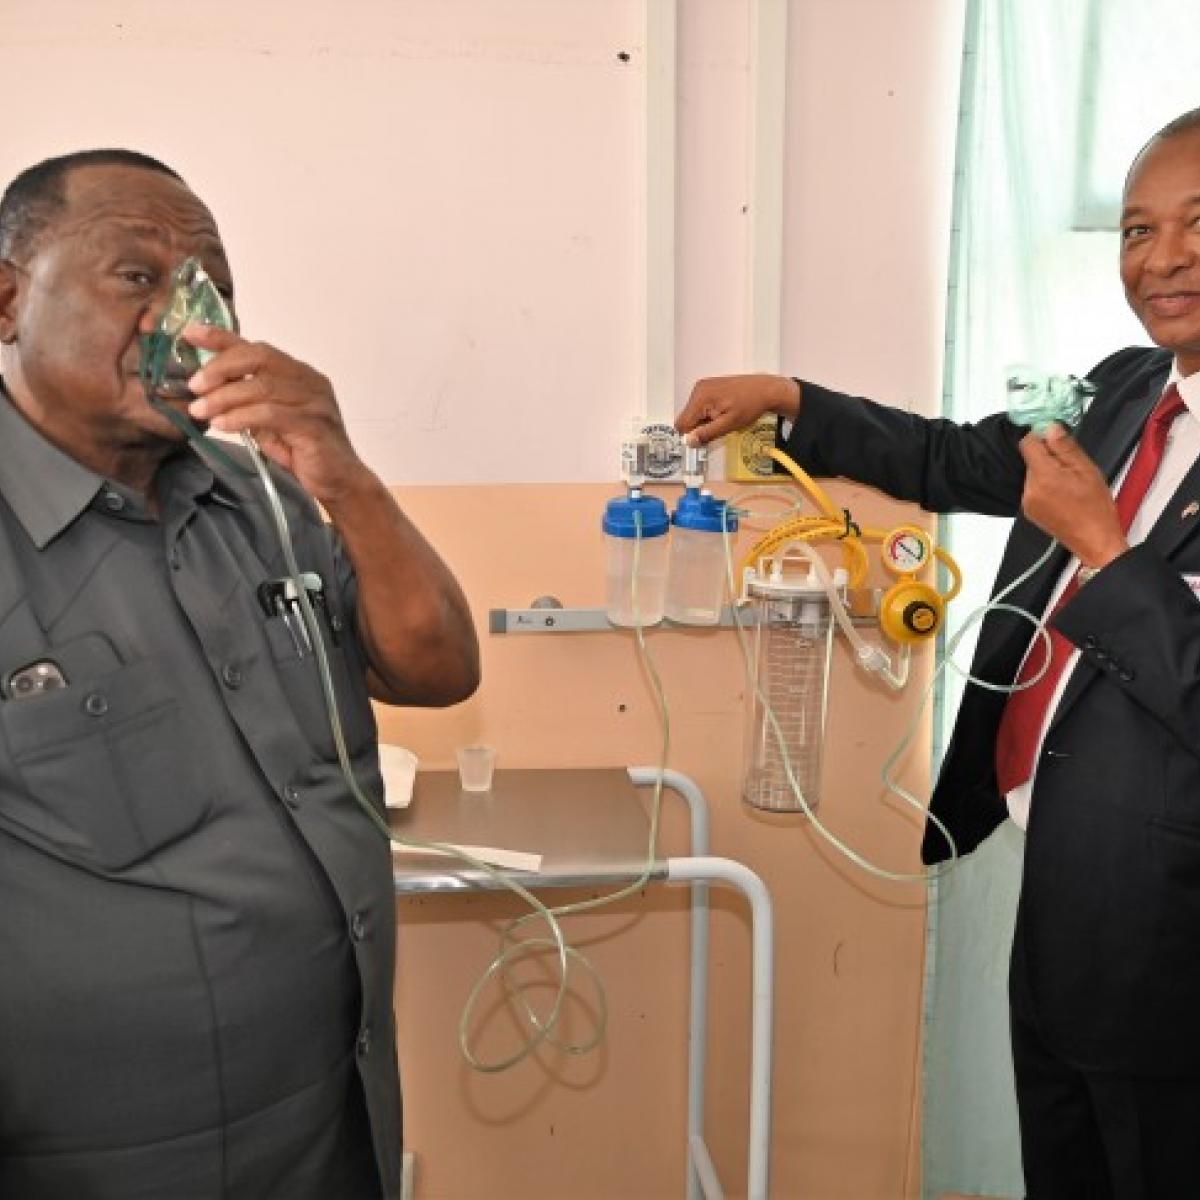 Dr. Kalumbi Shangula, Minister of Health and Social Services and Dr. Abeje Zegeye, Acting Health Office Director at USAID Namibia, demonstrating that oxygen arrives from the new plant at the hospital wards.